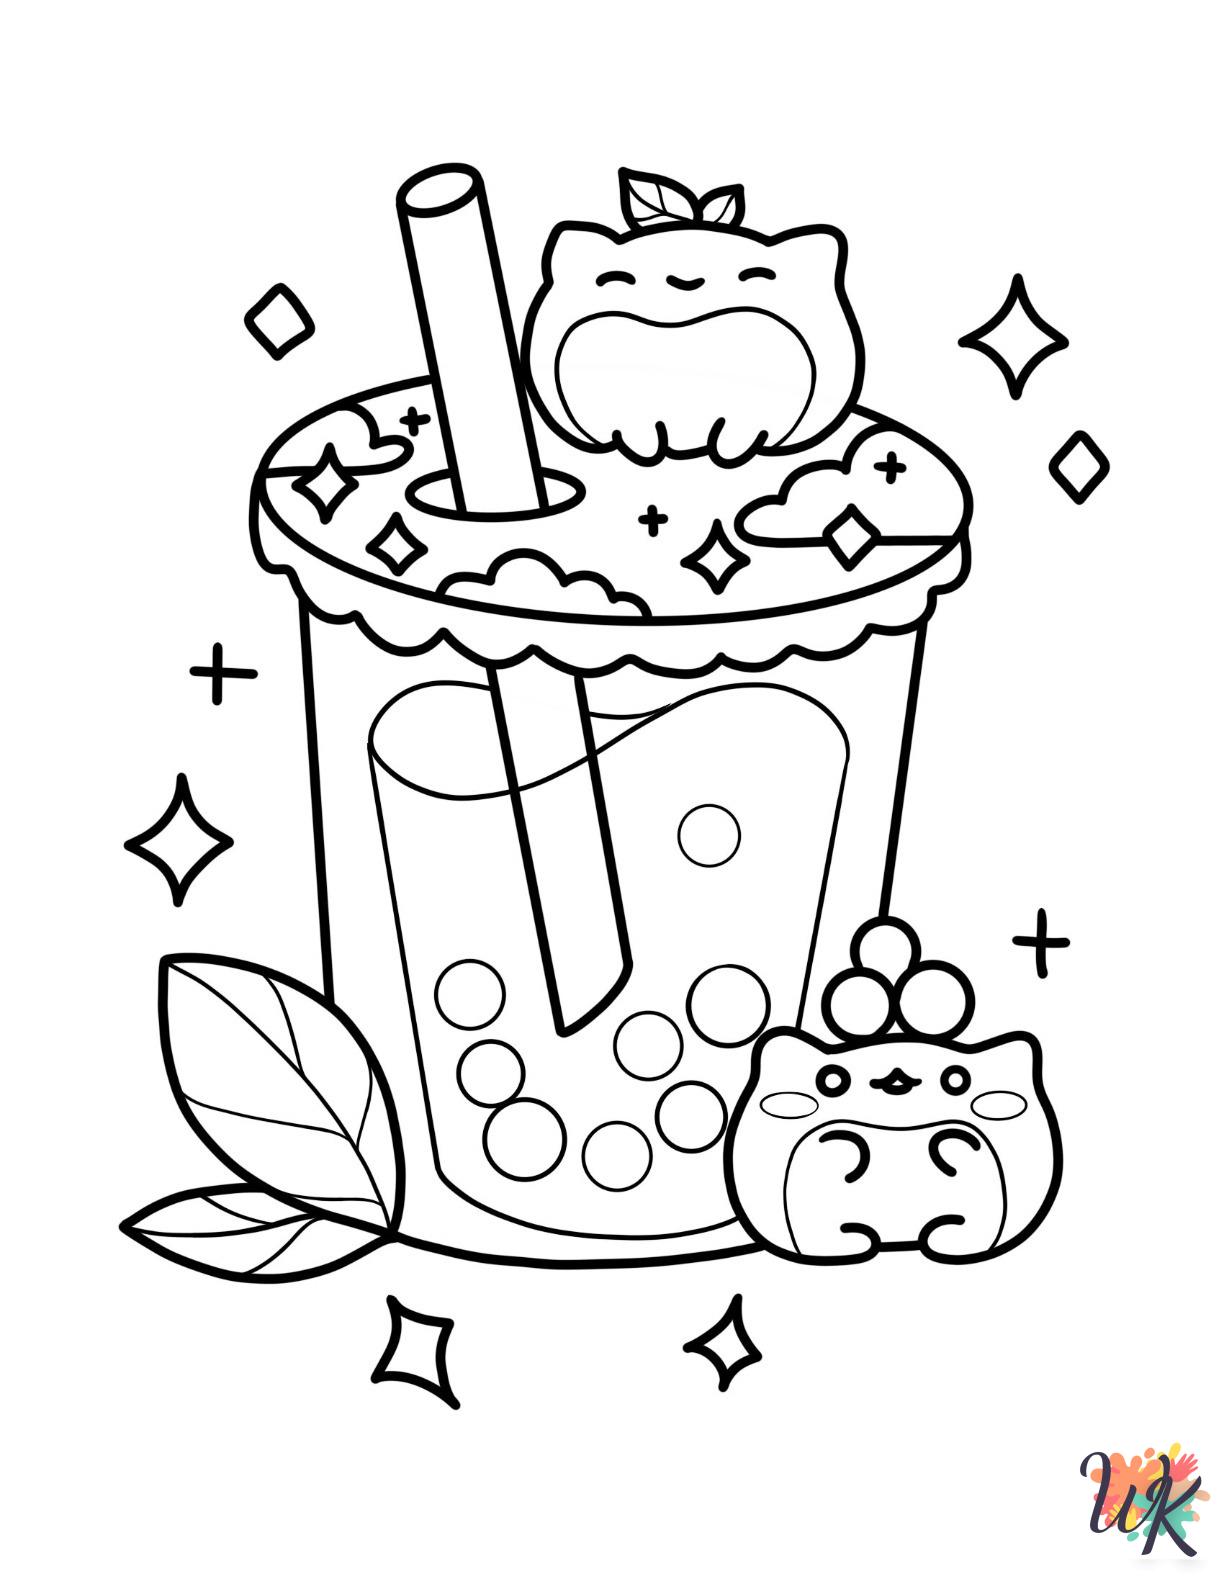 Boba Tea coloring pages for adults